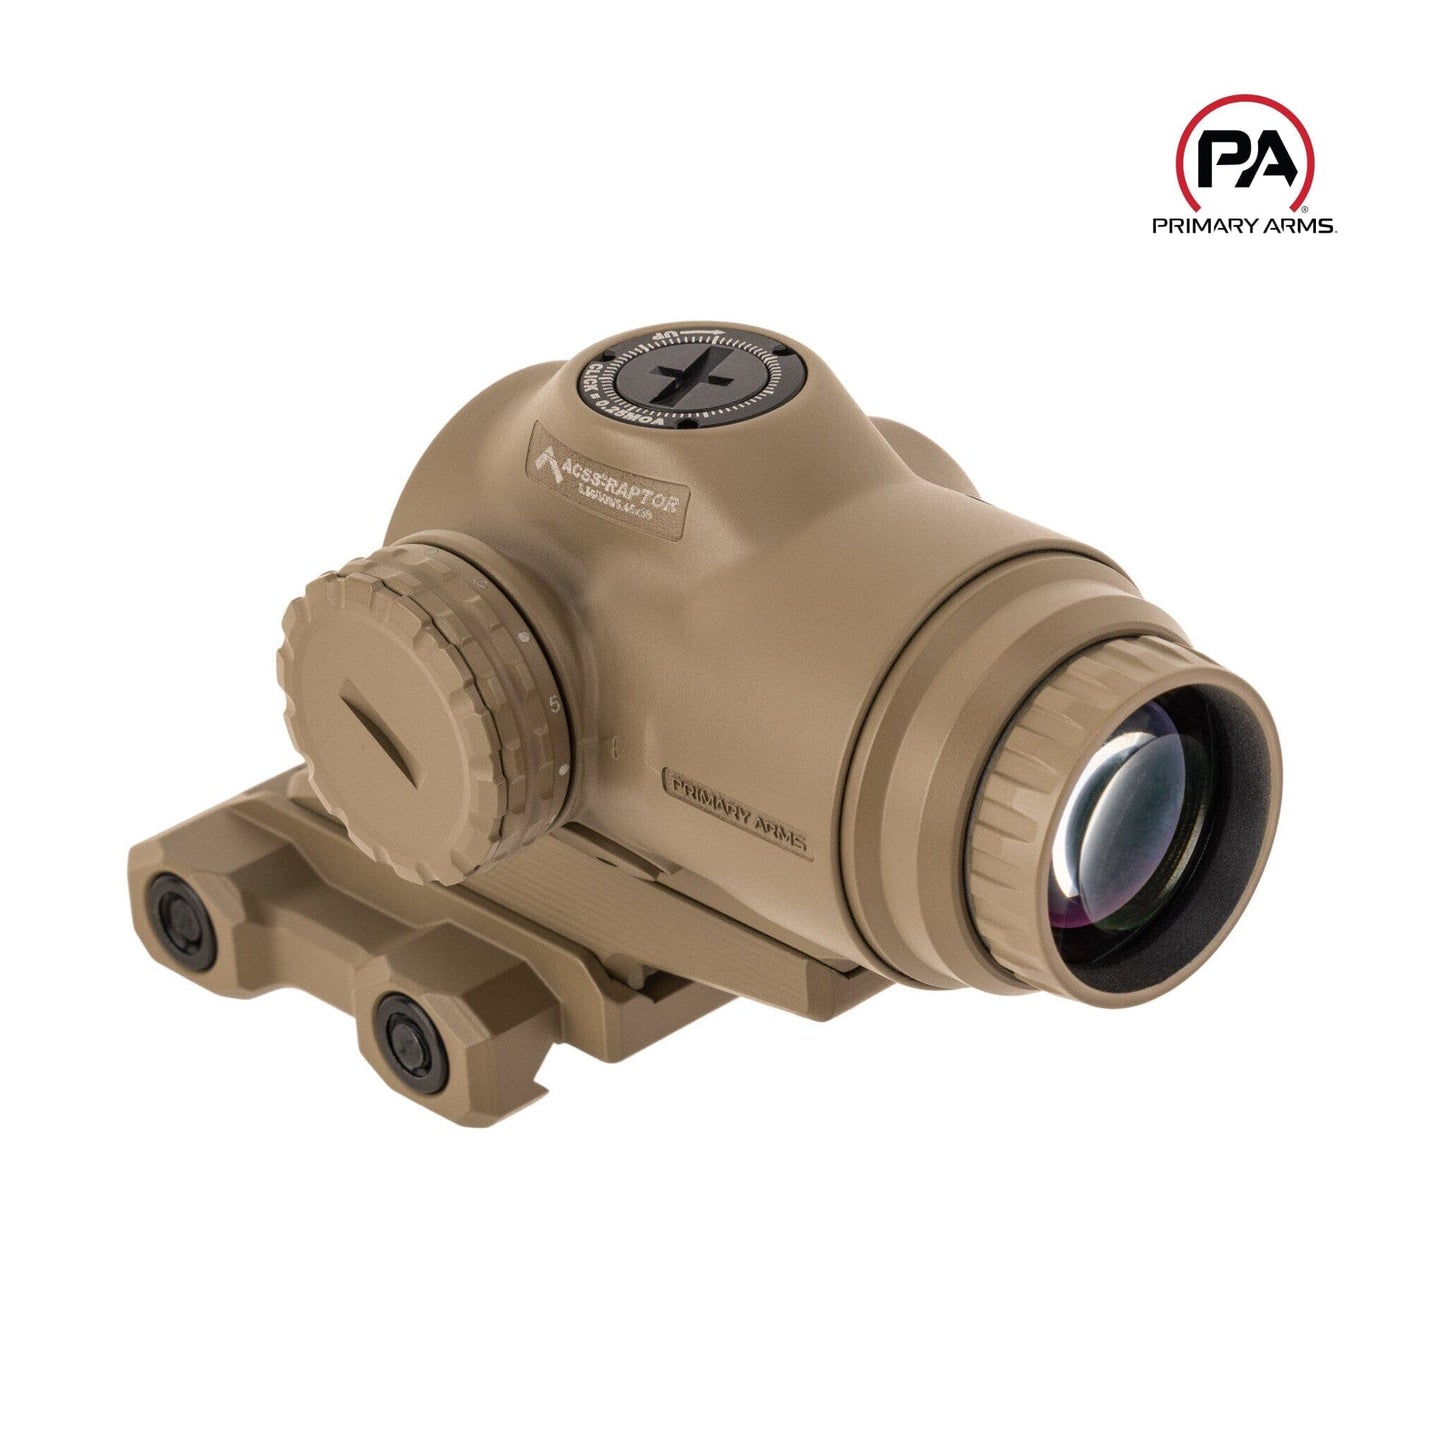 Primary Arms SLx 3x MicroPrism Sight - Red ACSS RAPTOR 5.56/.308 - Yard Reticle - FDE Prism Rifle Scope Primary Arms 